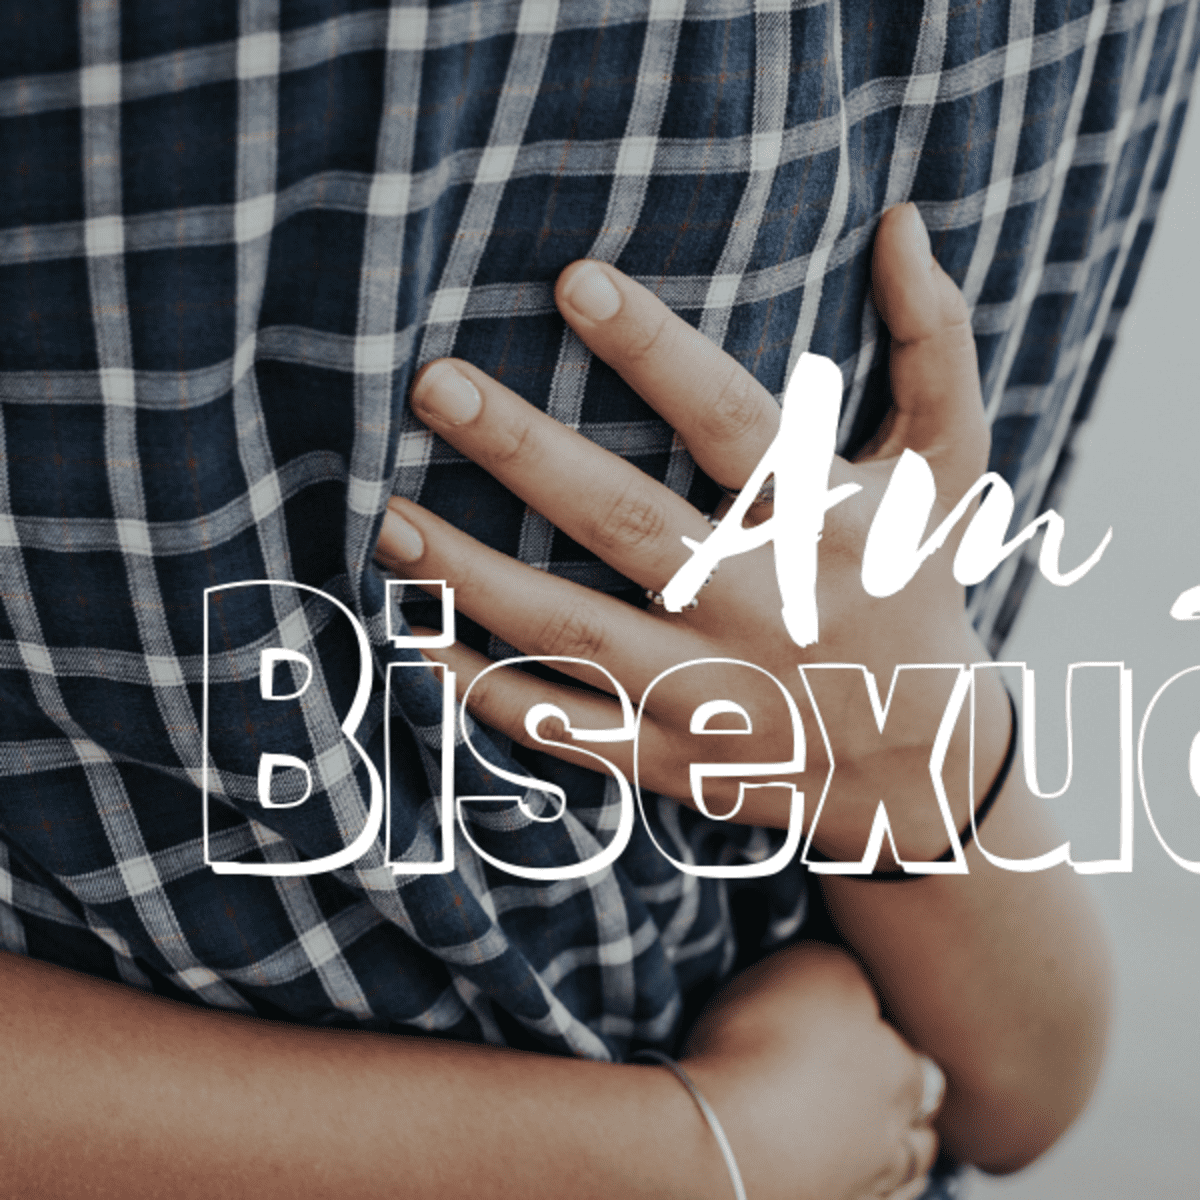 Bisexuality test for teens